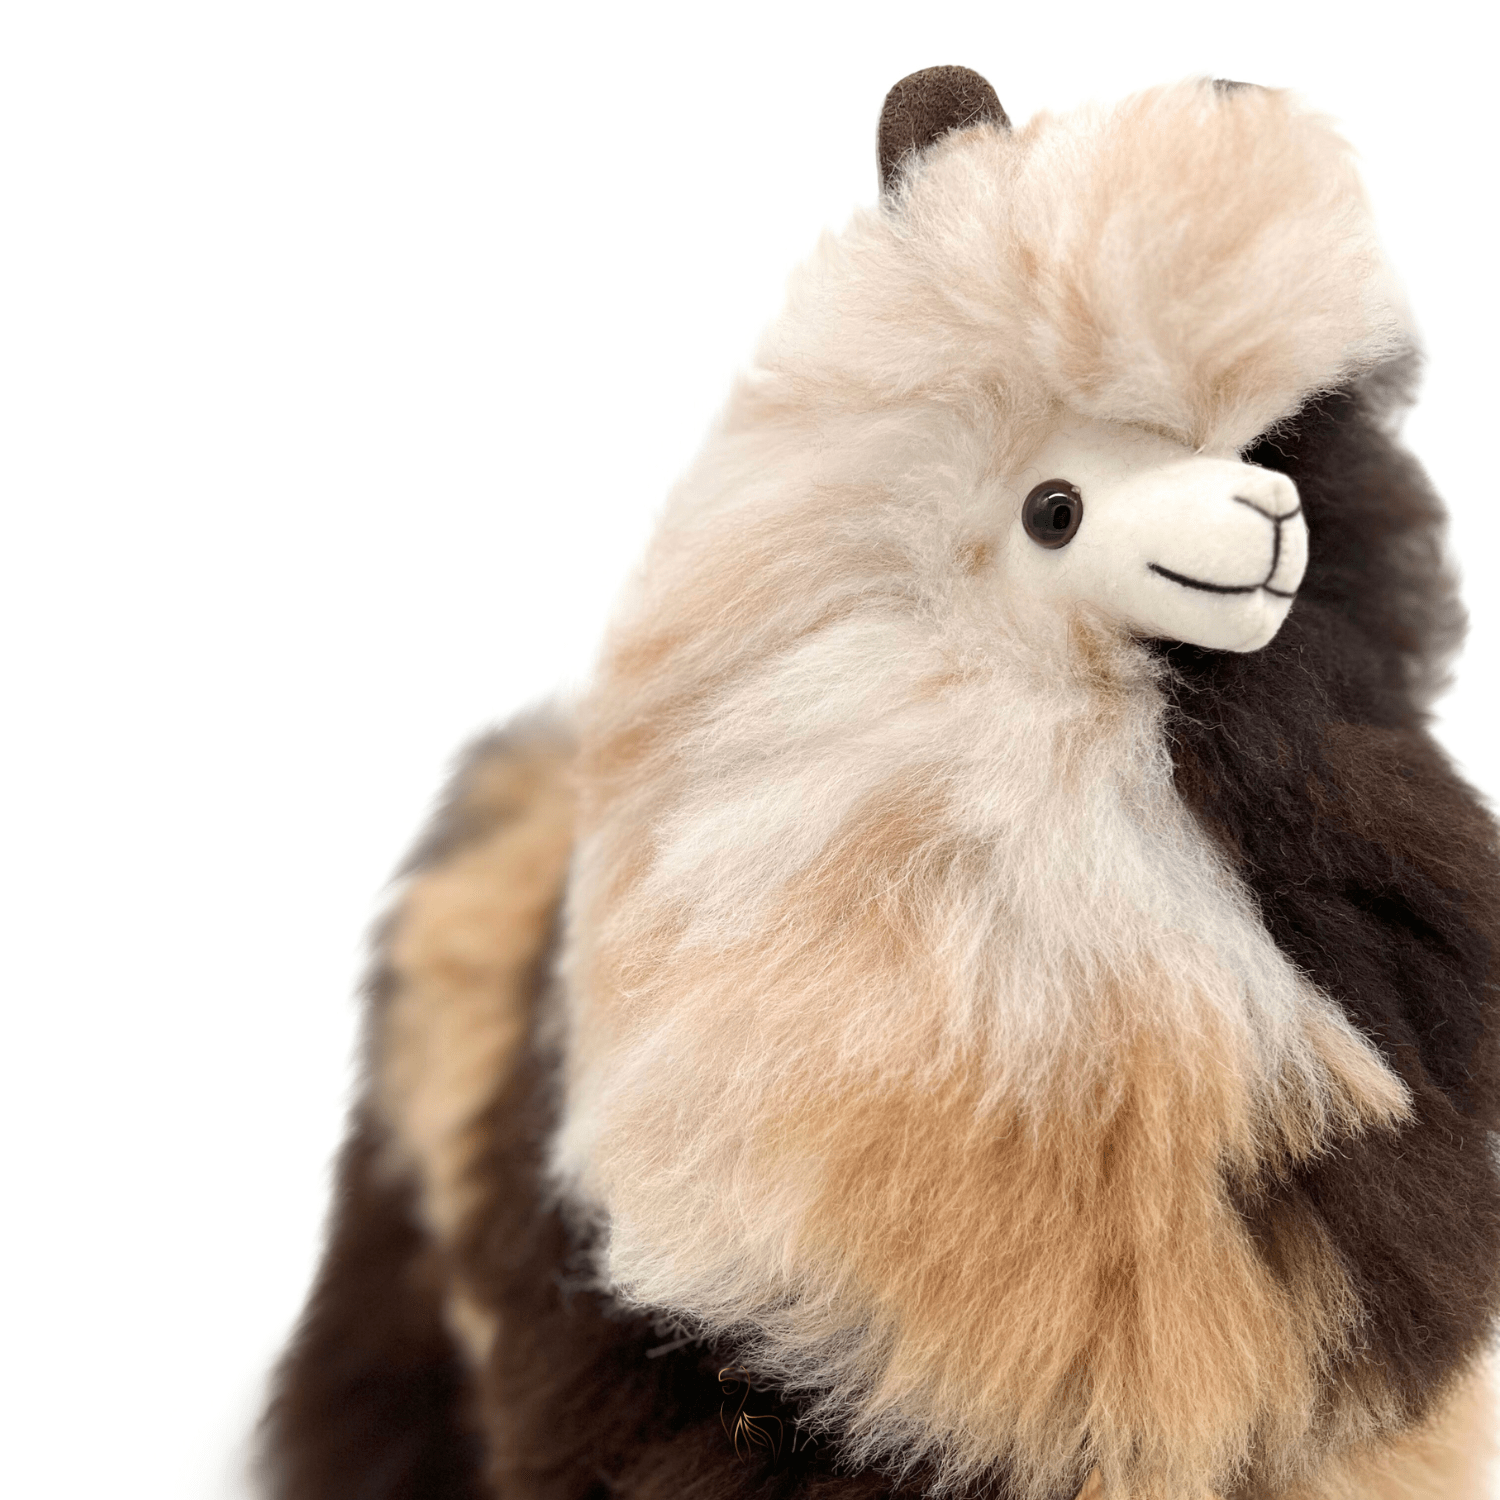 Iquitos - Large Alpaca Toy (50cm) - Limited Edition